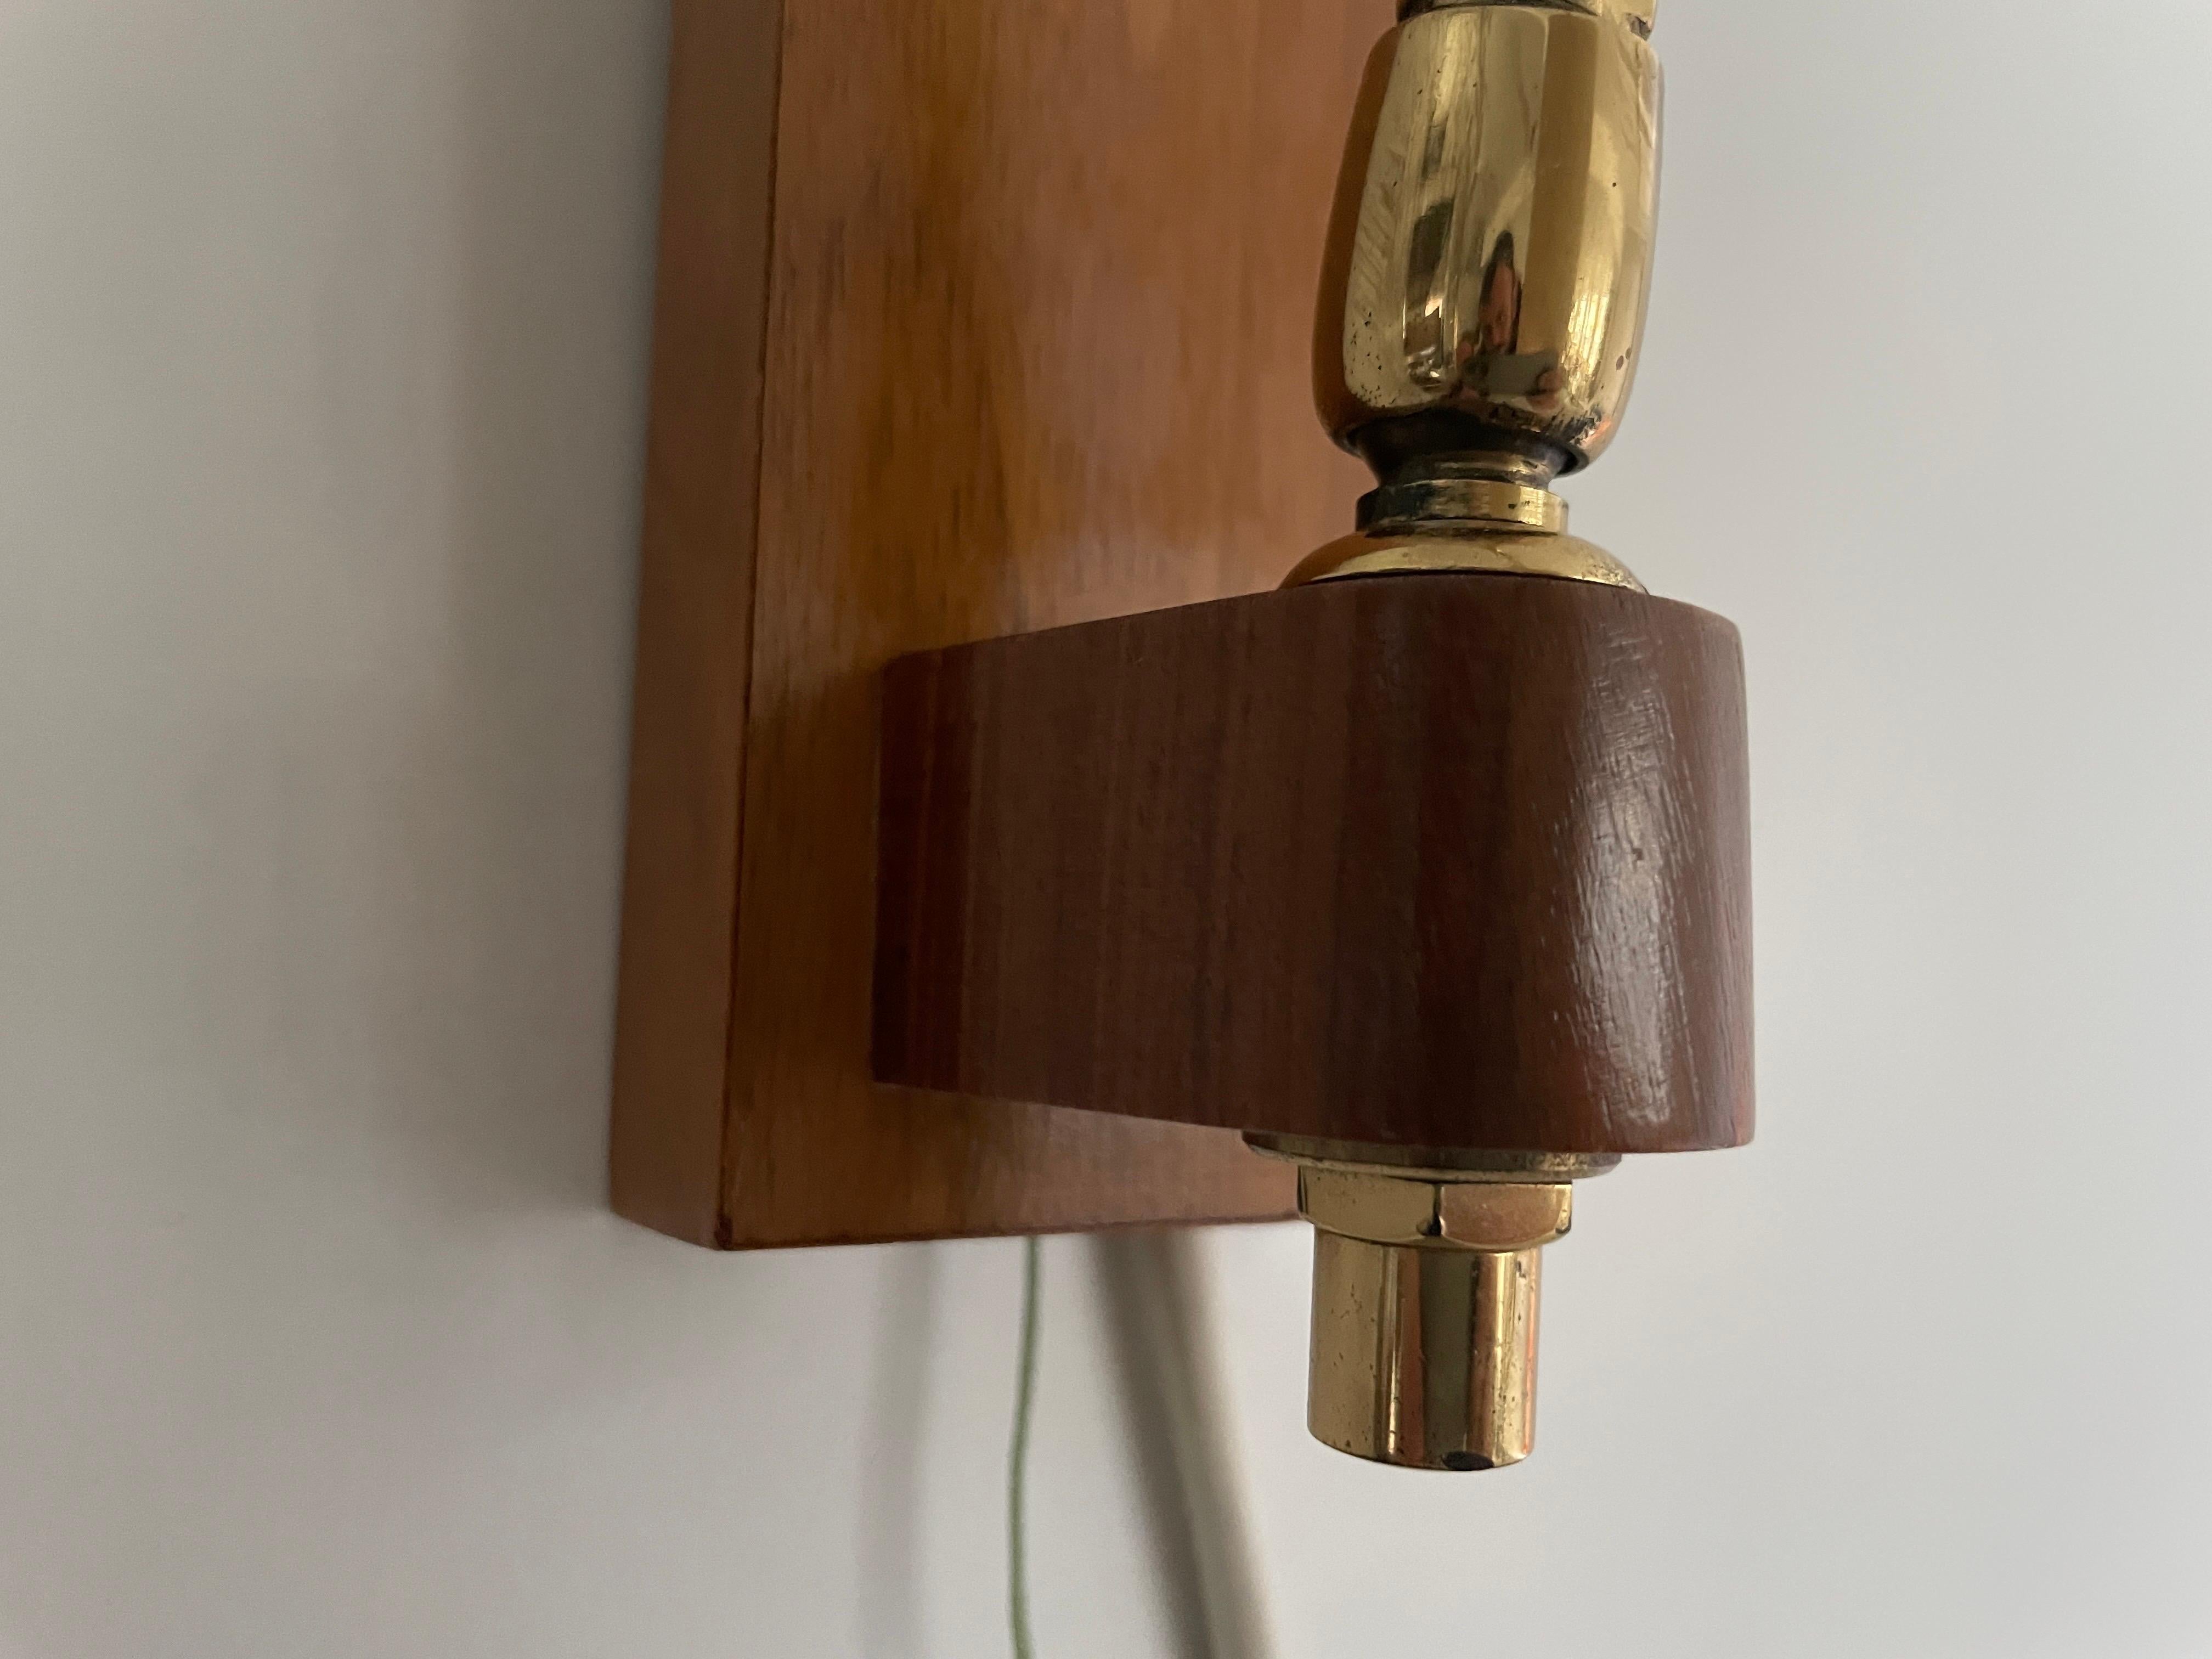 Fabric Shade and Wood Wall Lamp with Brass Neck, 1960s, Germany For Sale 4